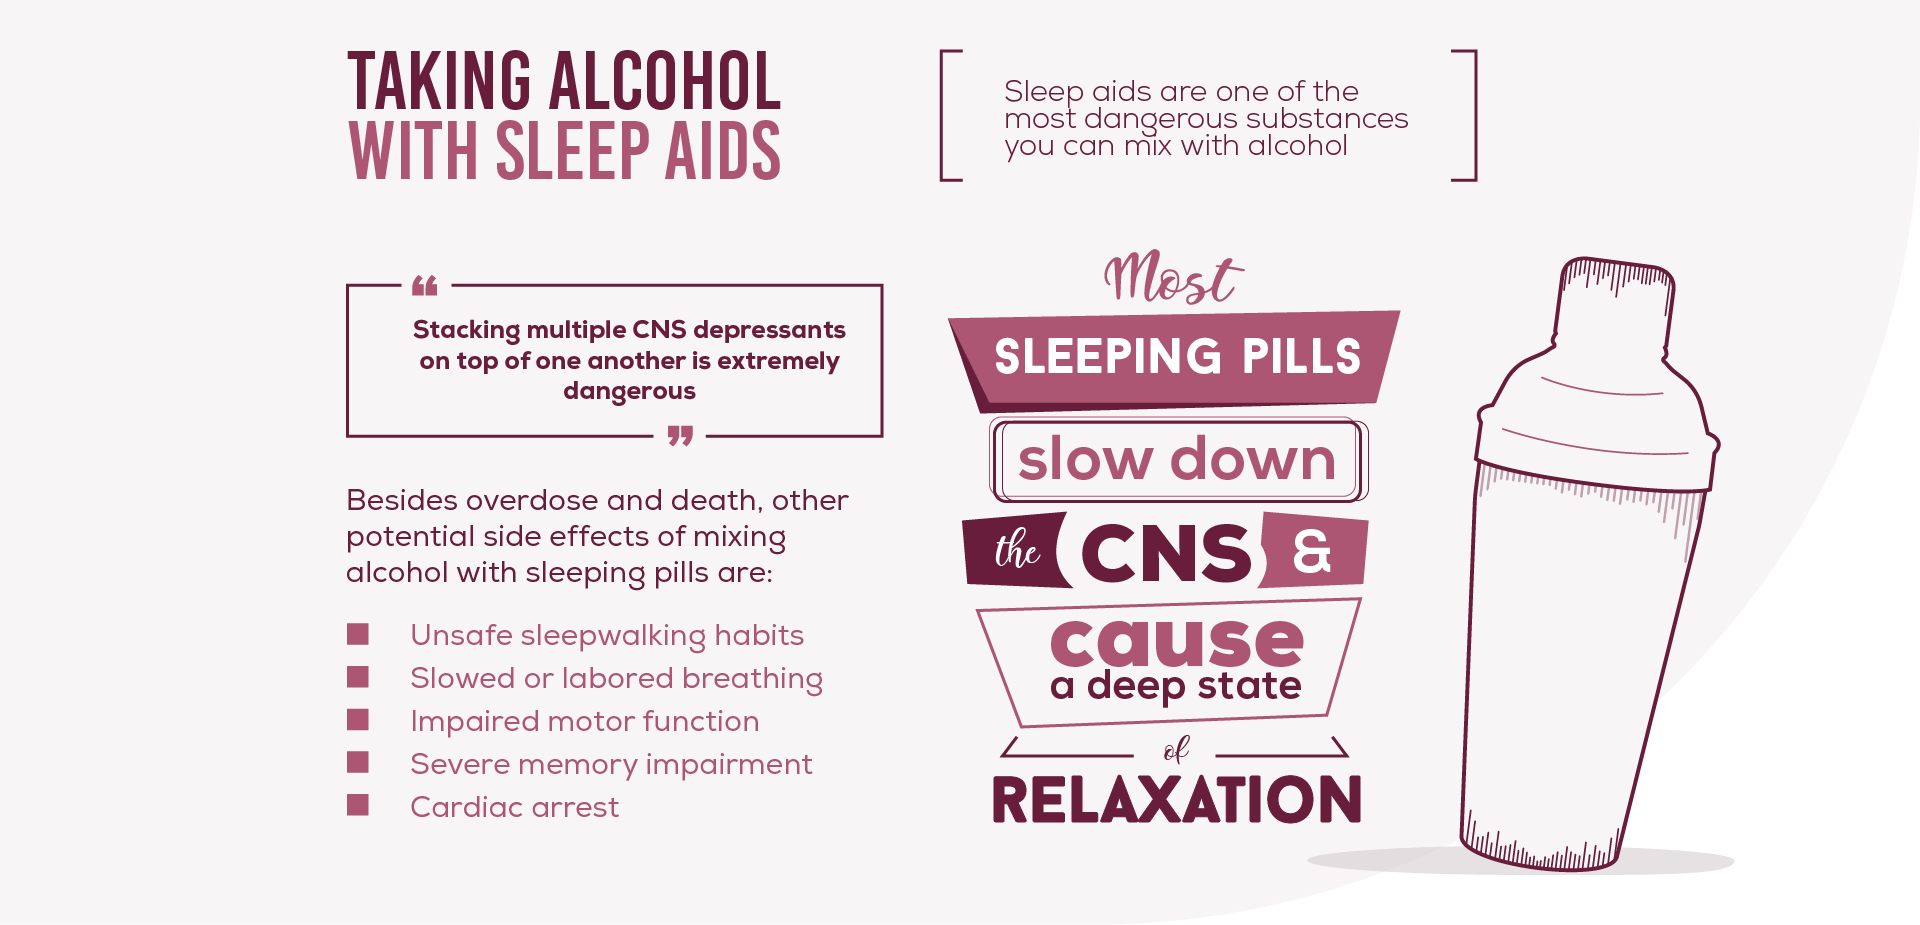 Mixing Alcohol With Sleep Aids